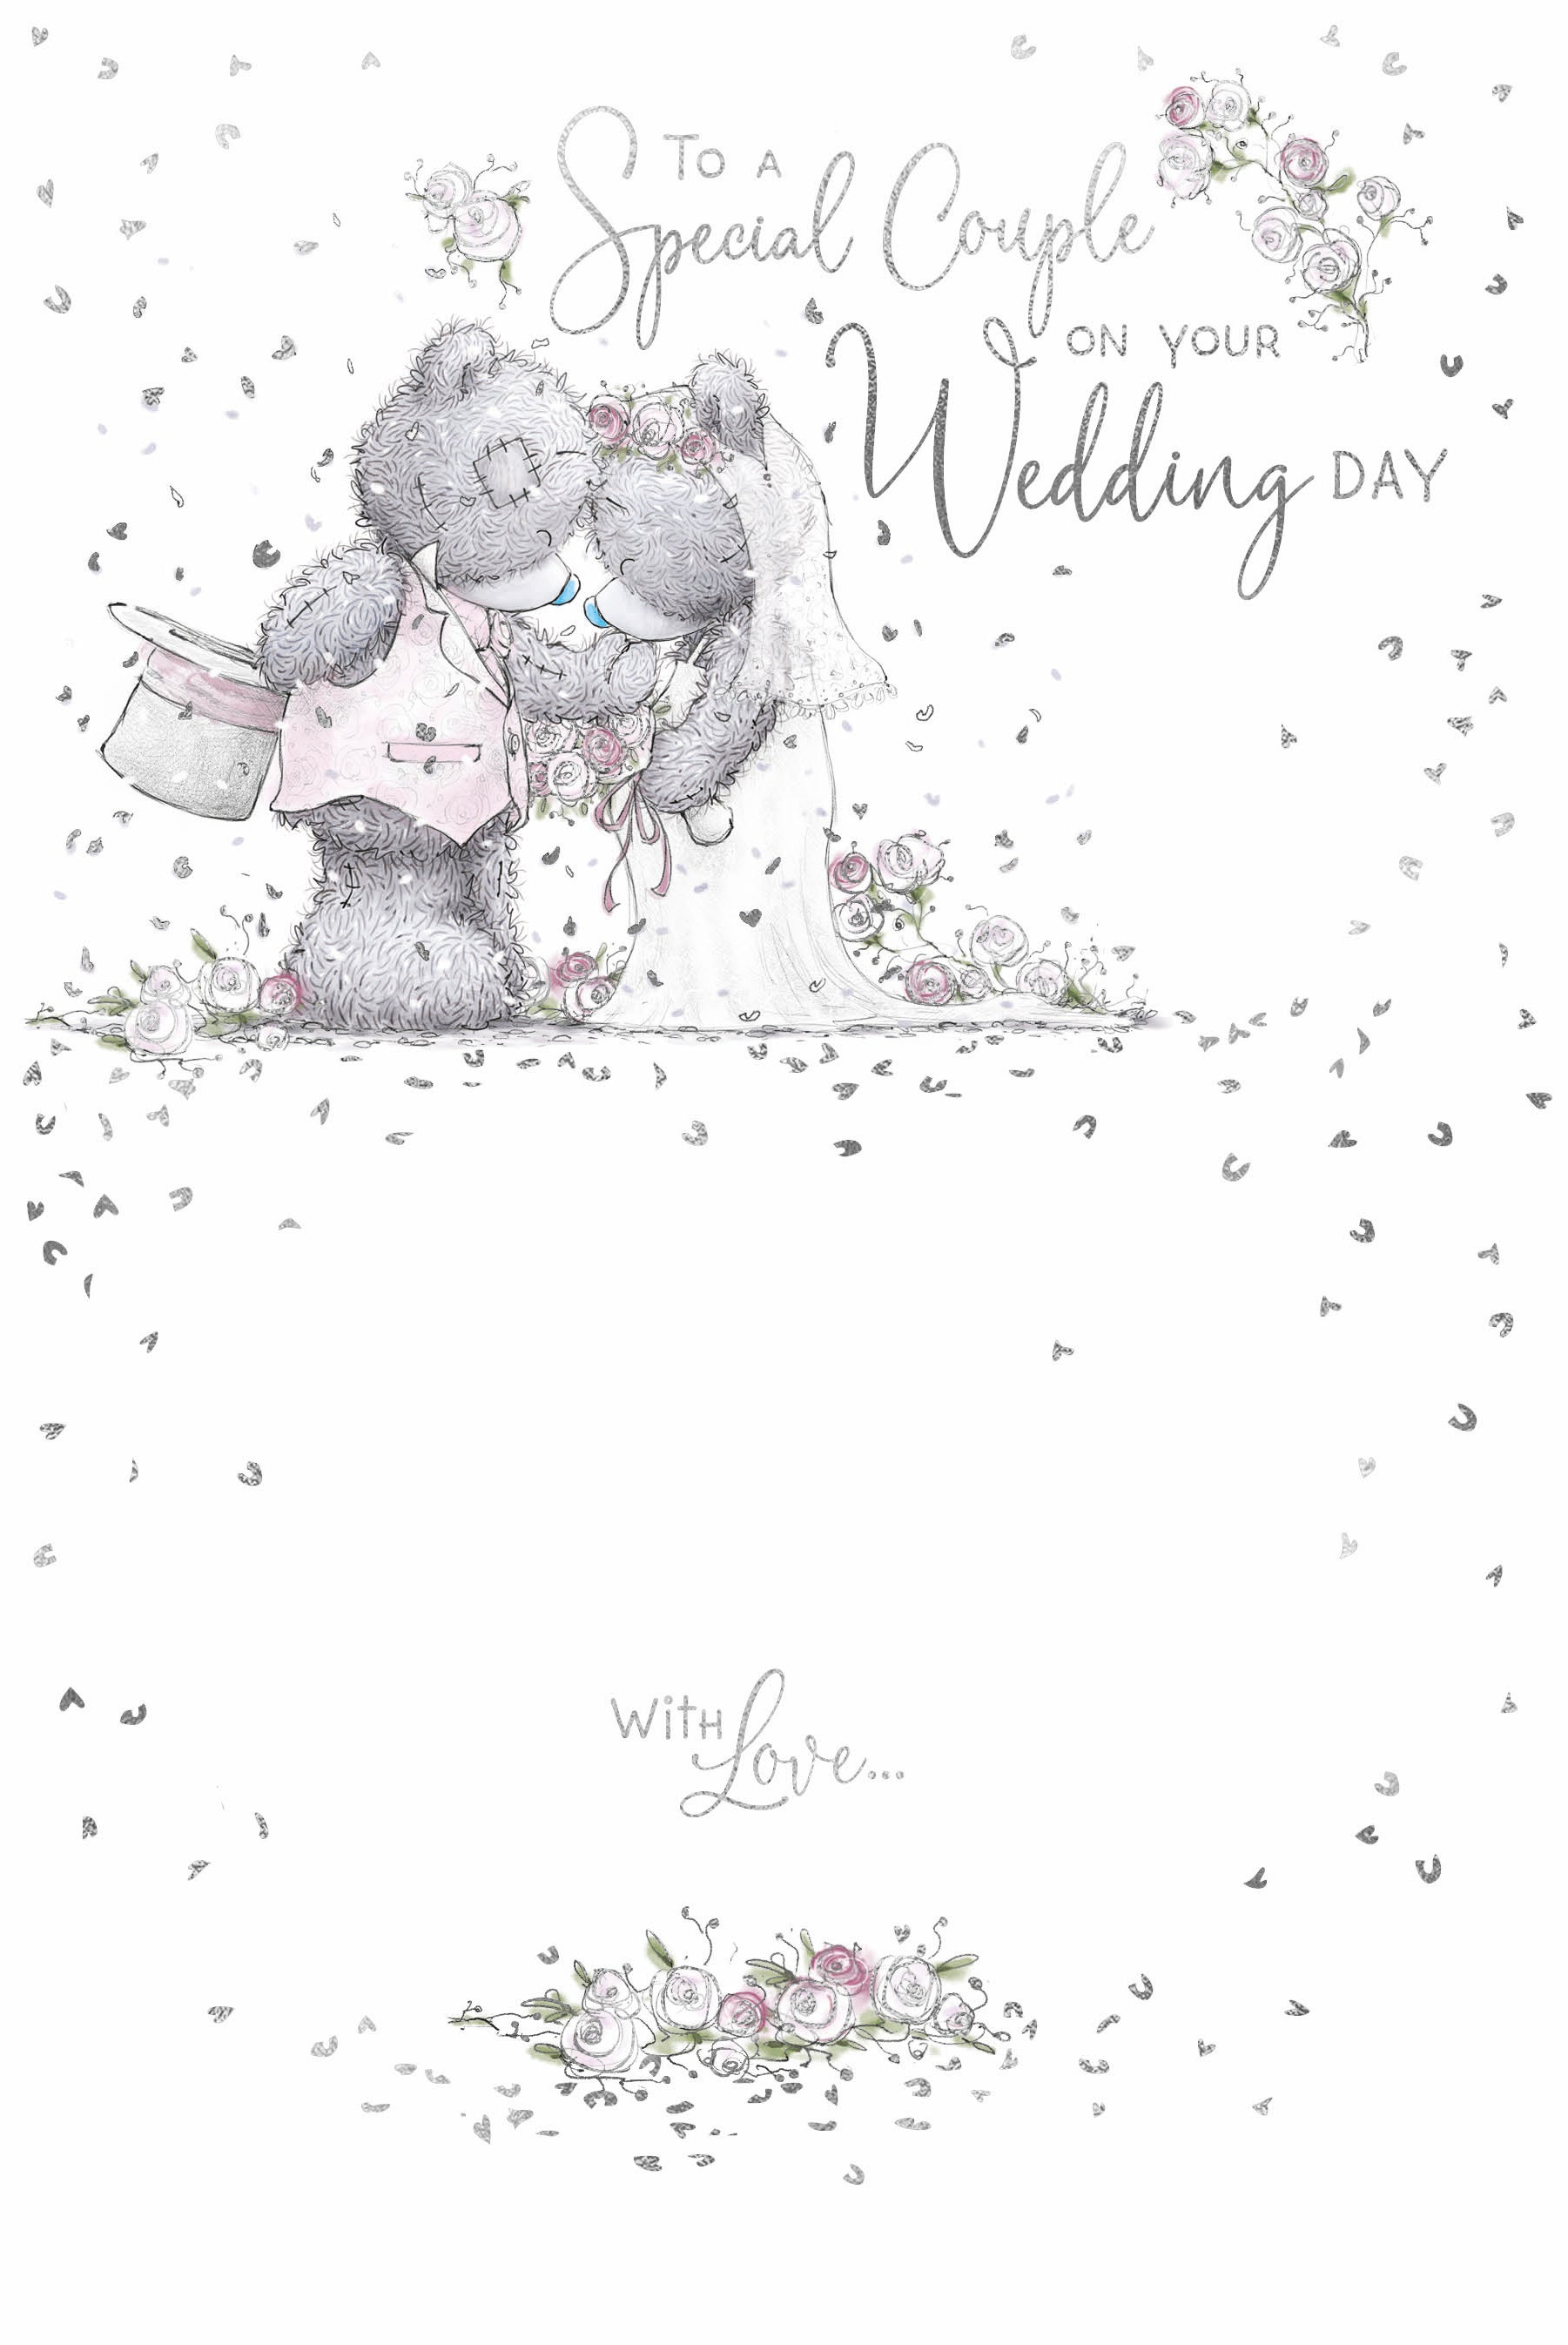 Special Couple on Your Wedding Day Card - Bear Bride And Groom